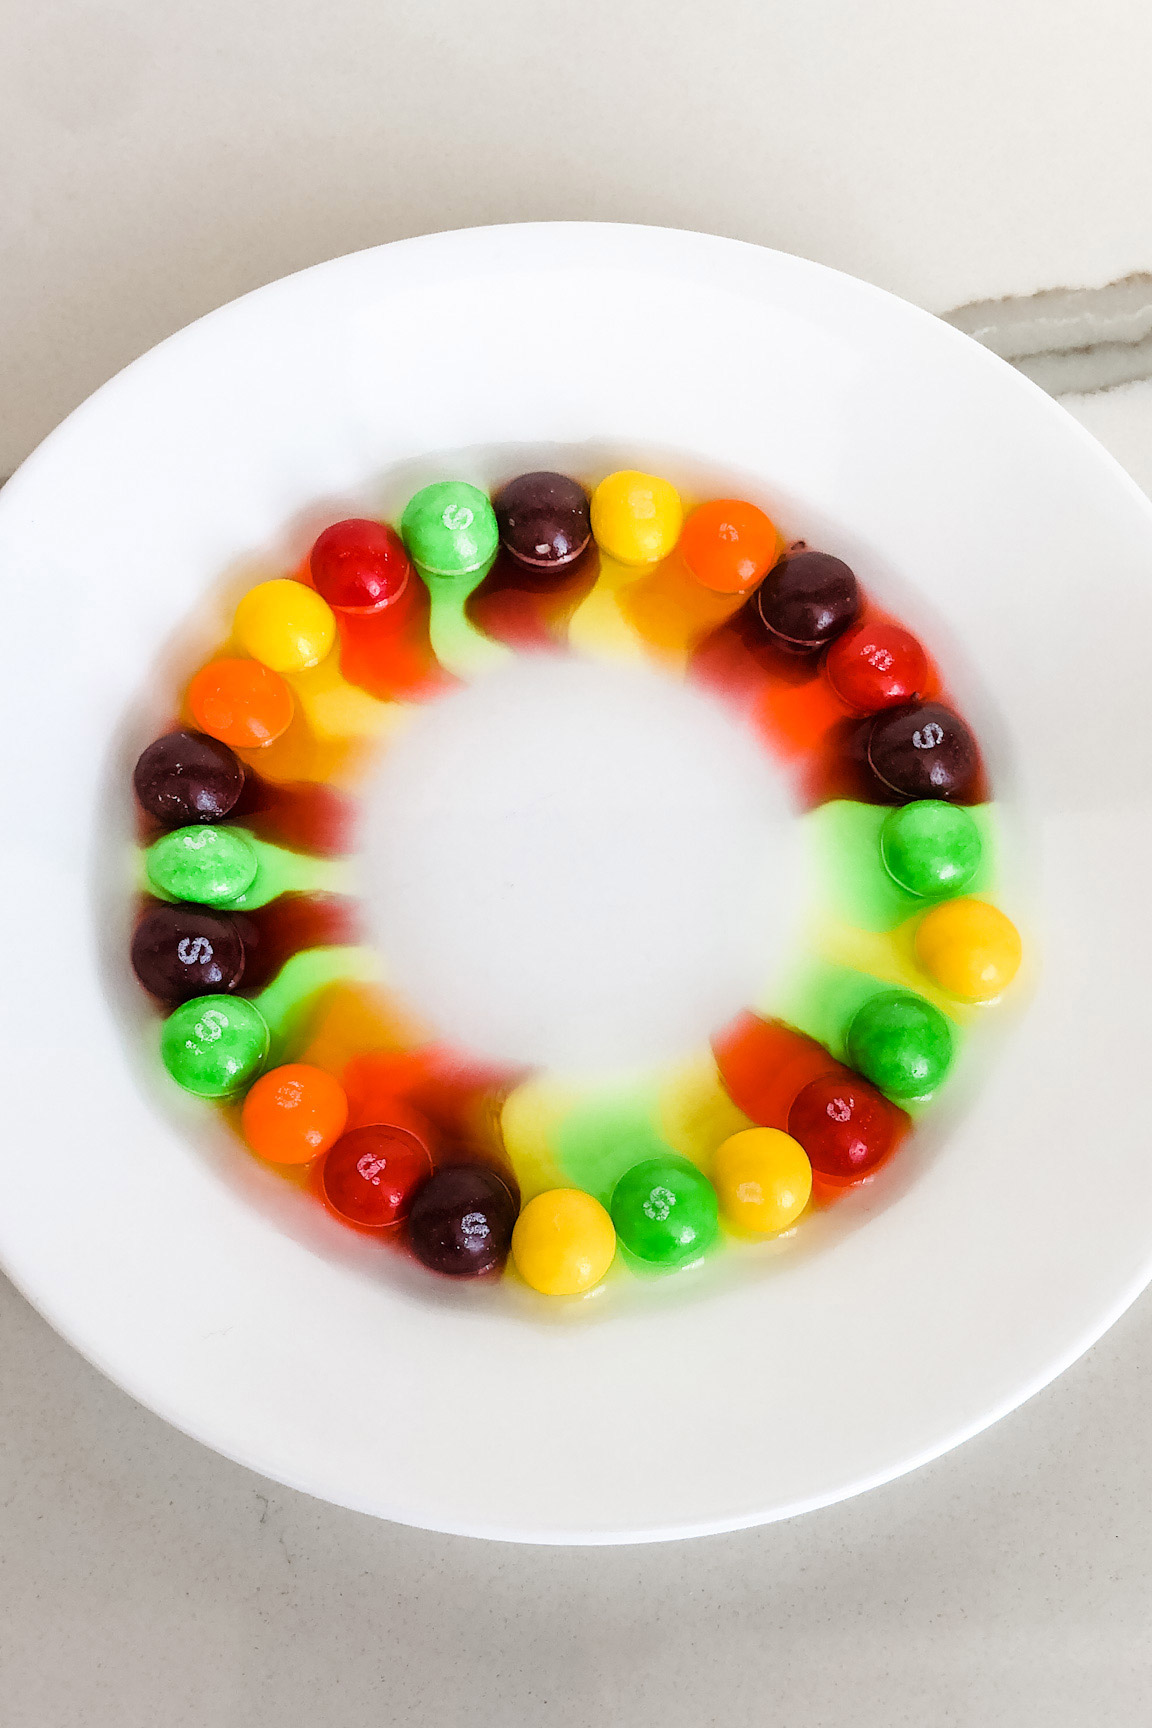 This image shows skittles on a plate that have had hot water poured on them creating a rainbow effect on the plate.